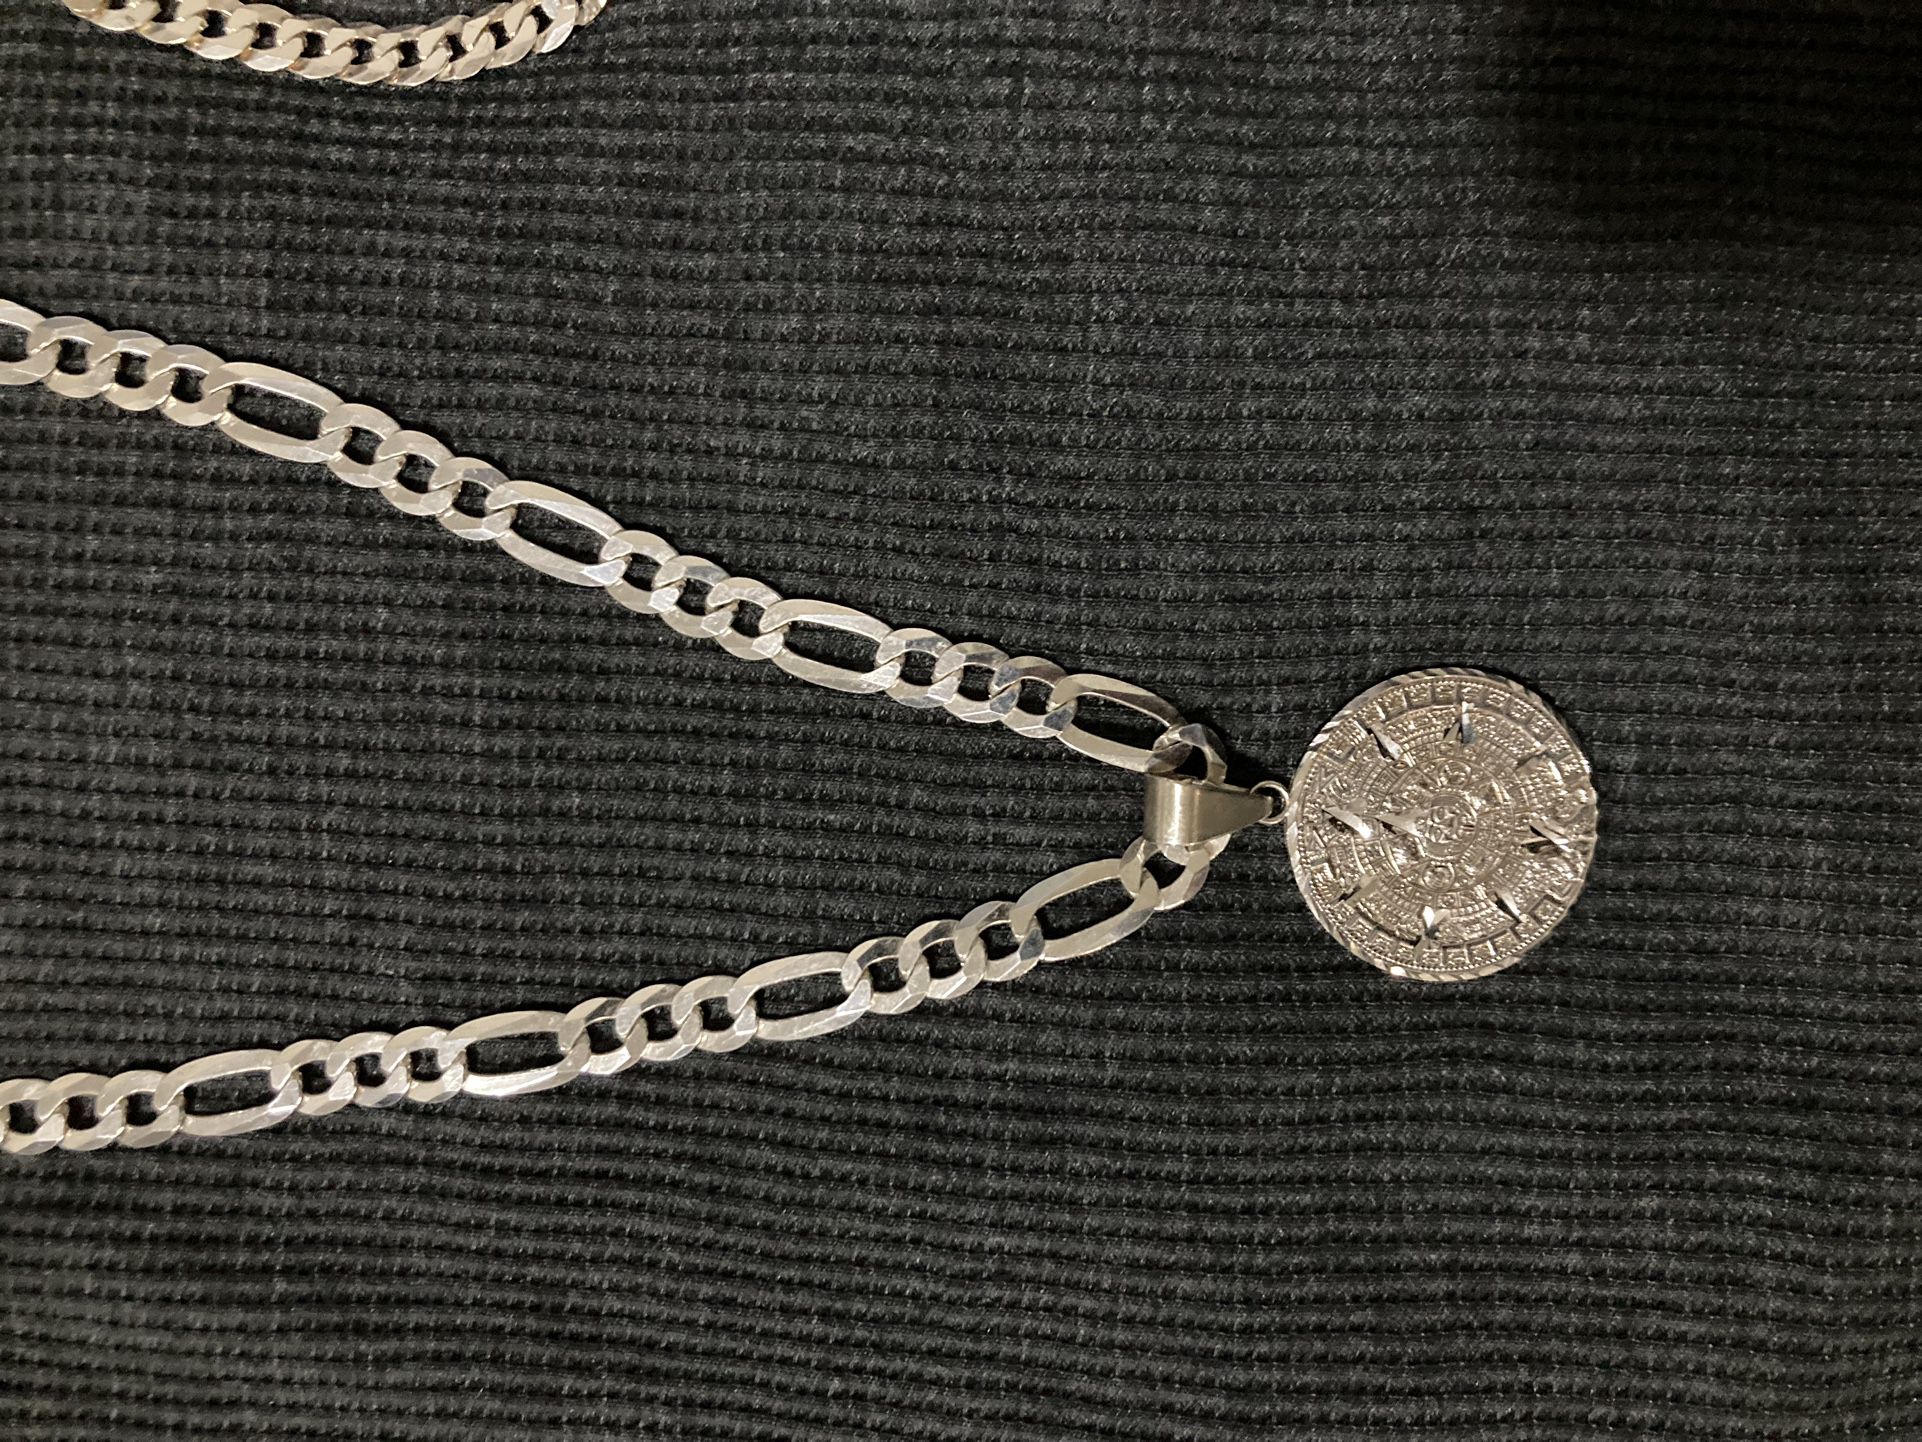 Silver chain for men 9.25 New $250for both Calendar Aztec